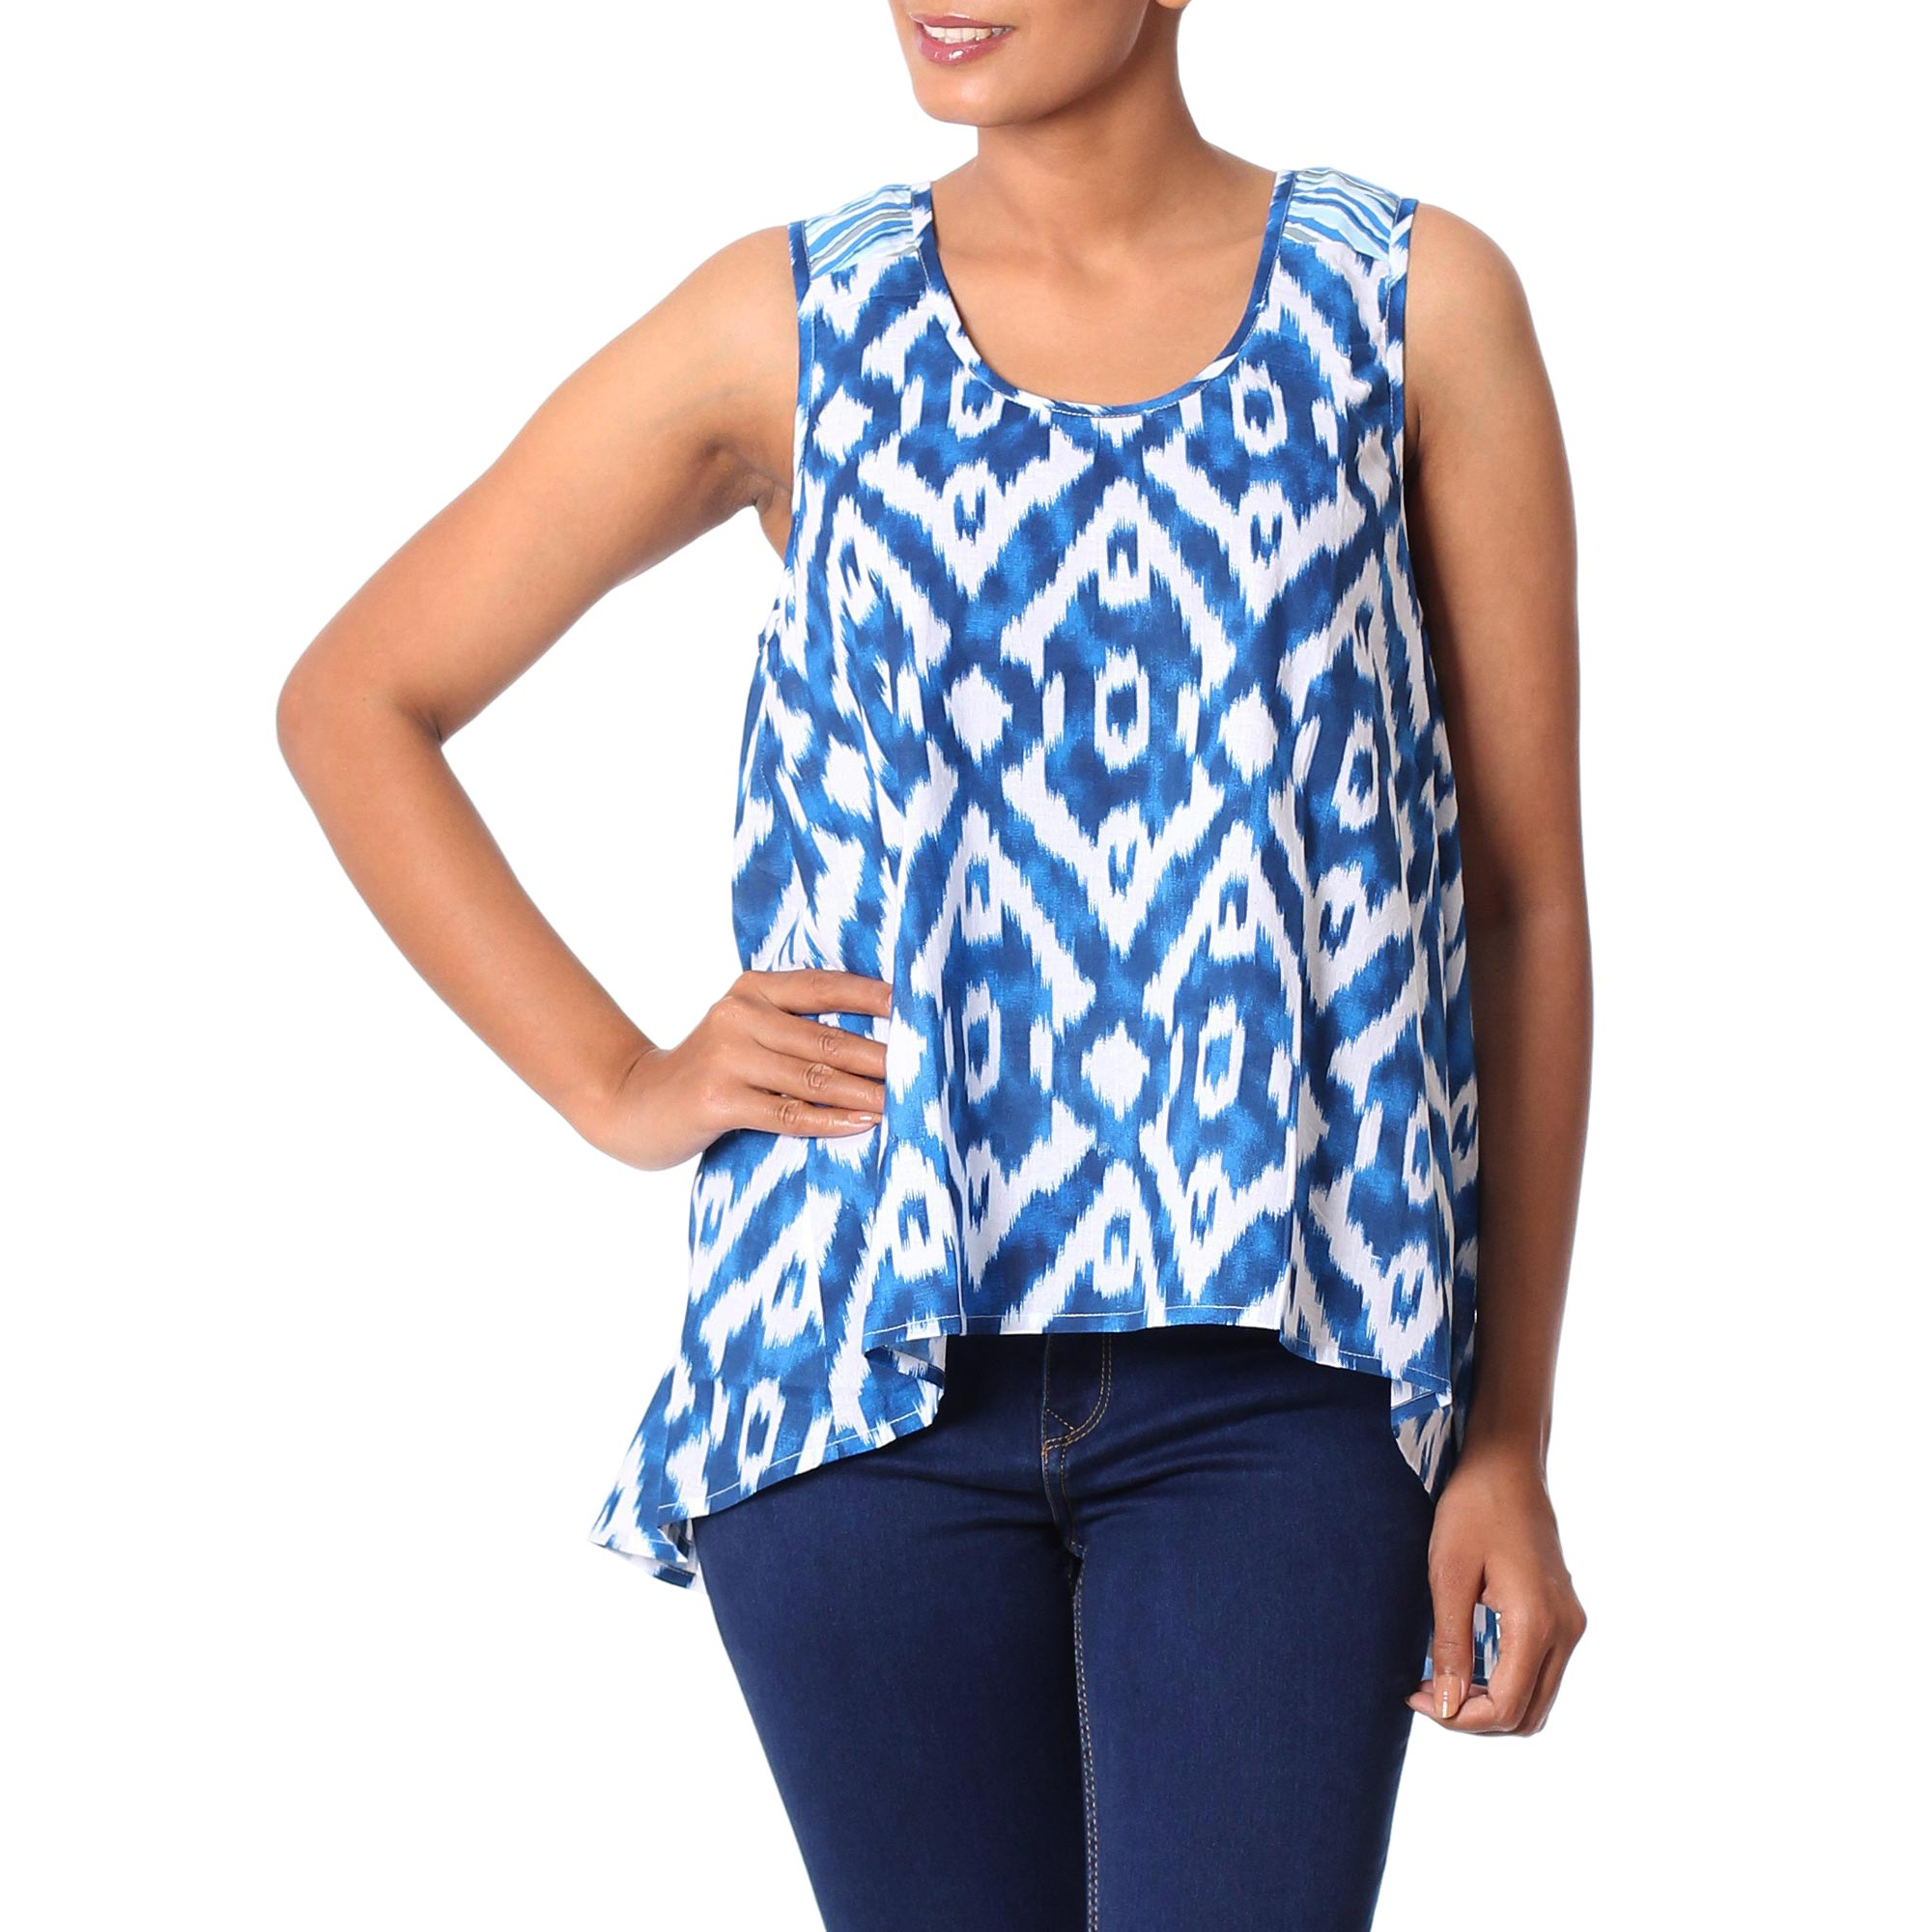 UNICEF Market | Women's Blue and White Cotton High Low Tank Top from ...